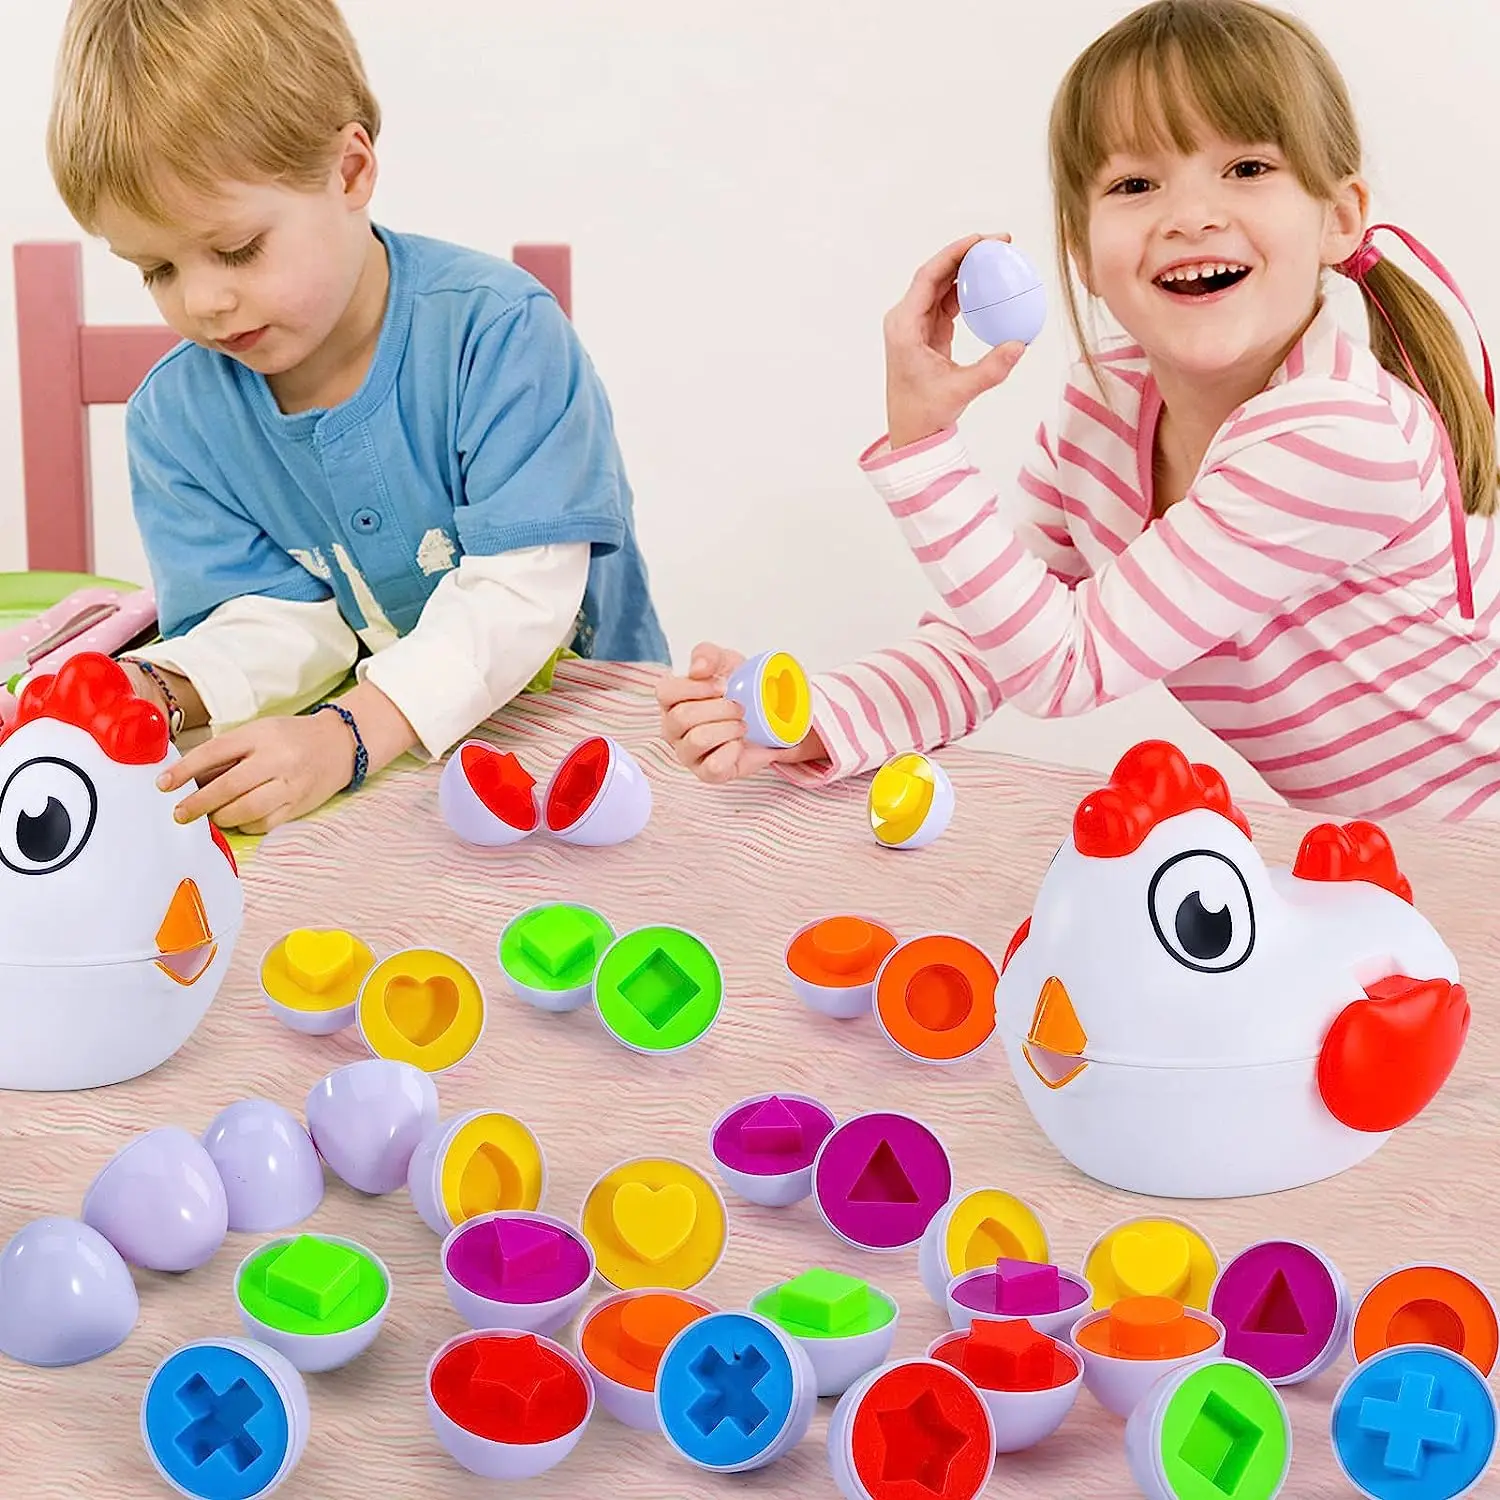 

Baby Learning Educational Toy Smart Egg Toy Games Shape Sorters Toys Matching Eggs Montessori Toys For Kids Children 2 3 4 Years